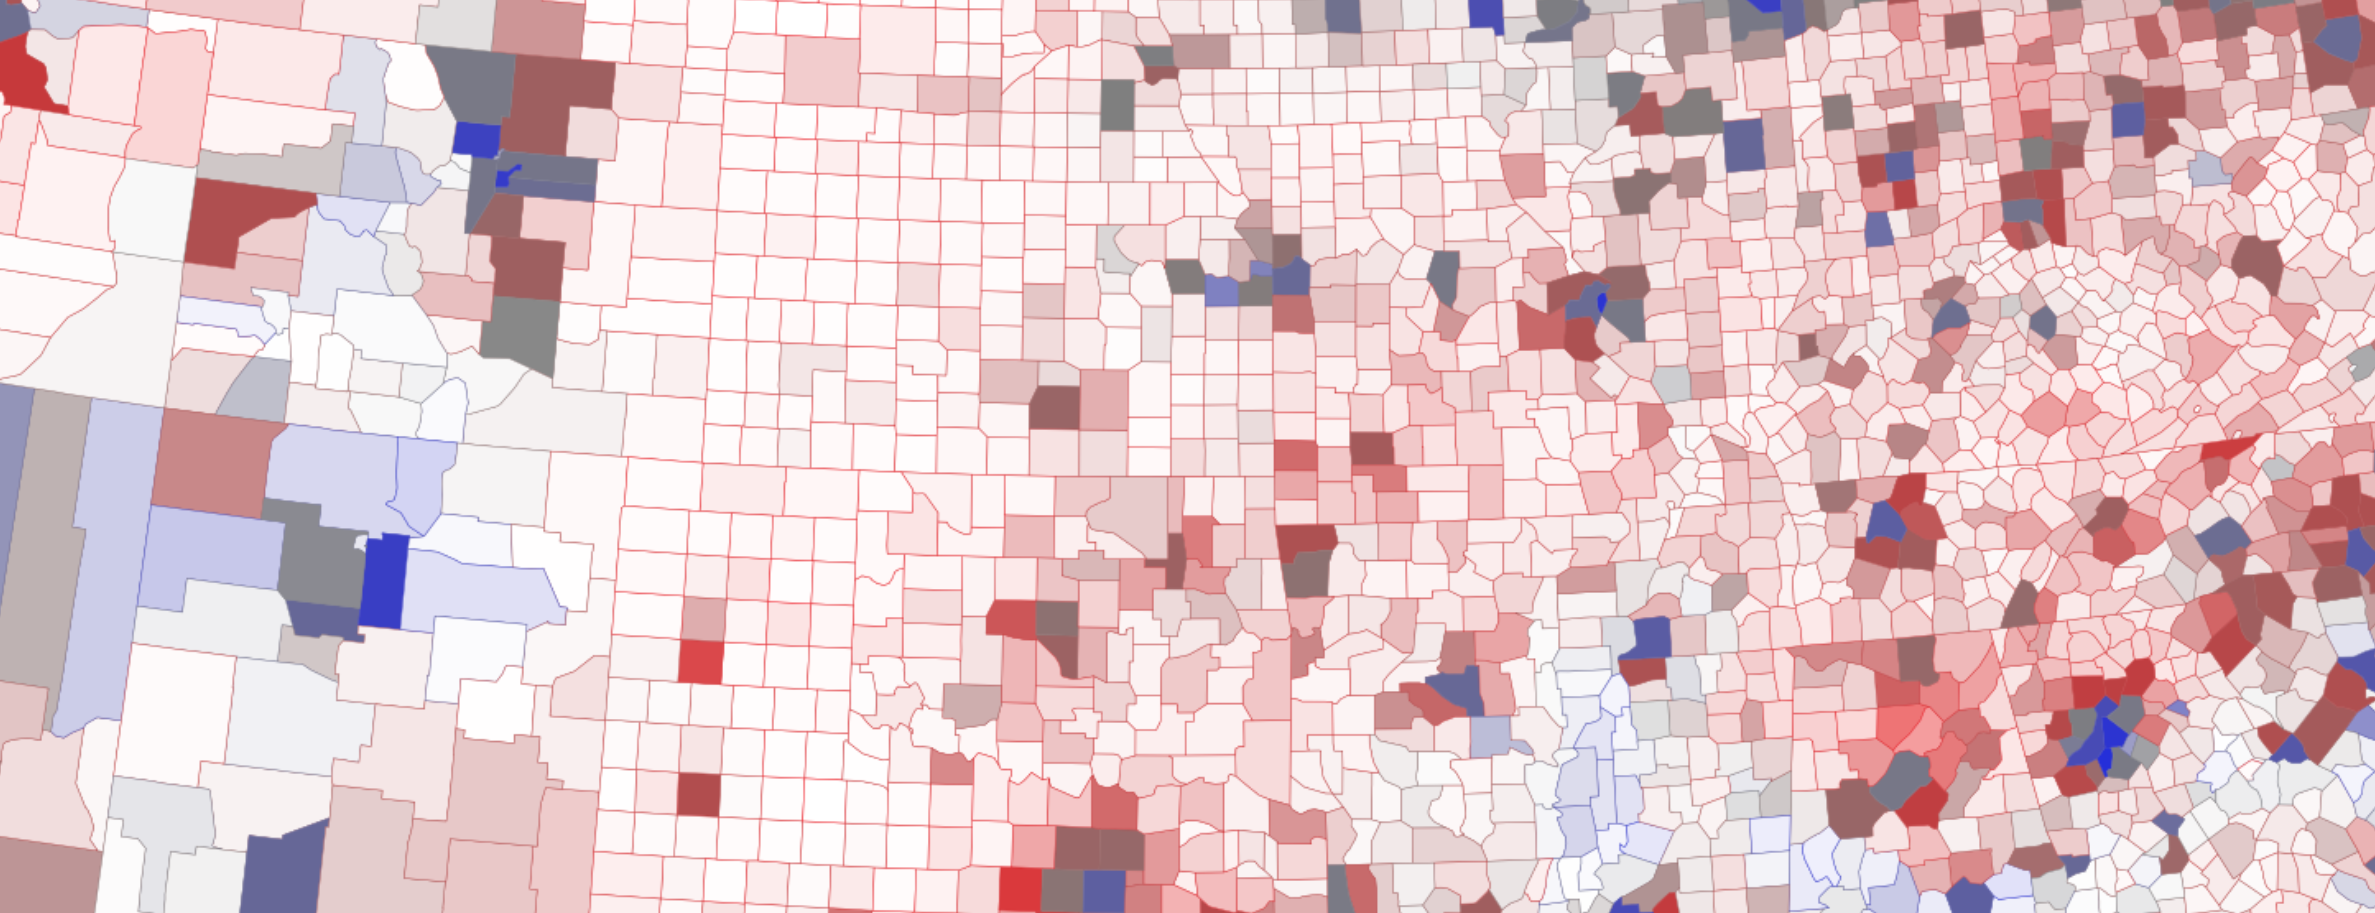 We see a zoomed in crop of the Muddy America map, showing lightly colored counties and darker colored counties, all with hues in the range between red and blue, with a grey intermediary